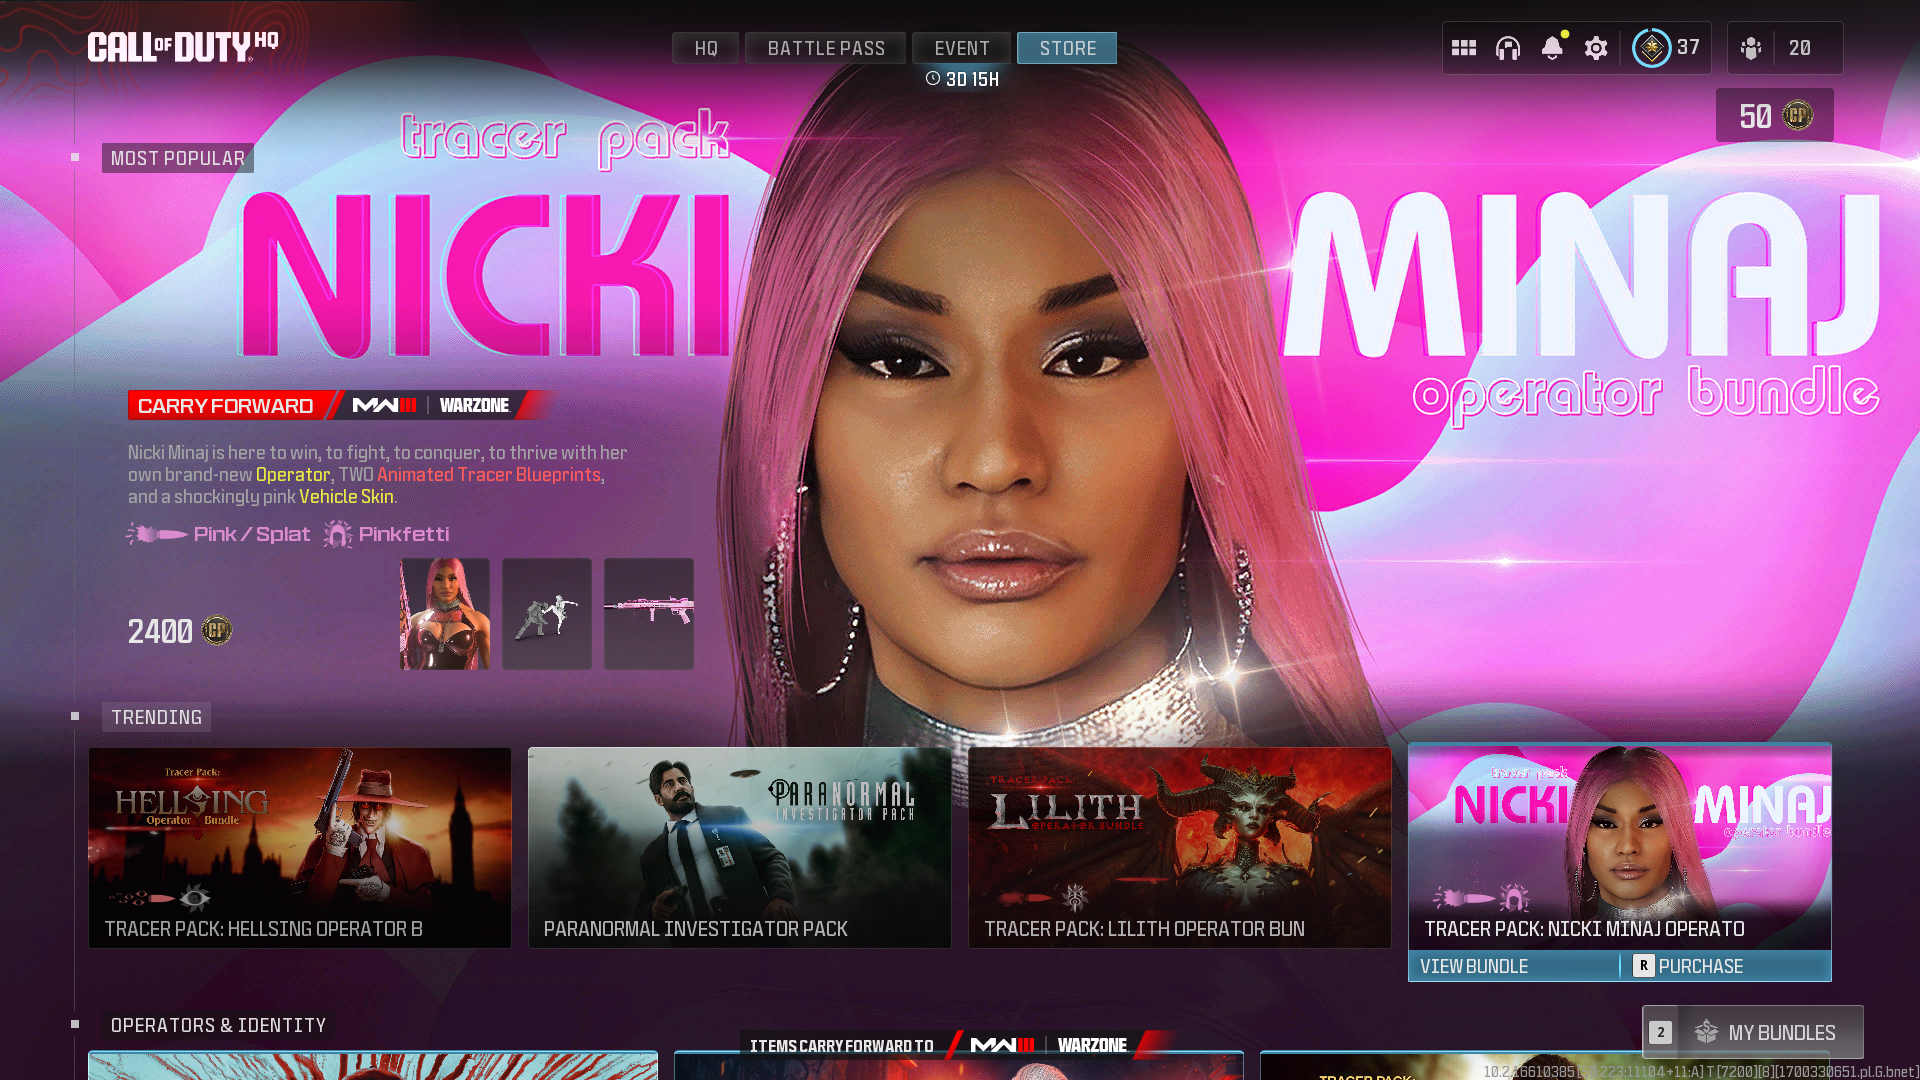 A screenshot of the Call of Duty in-game store, showing a series of increasingly out-of-place cosmetic bundles and featuring a Nicki Minaj skin.